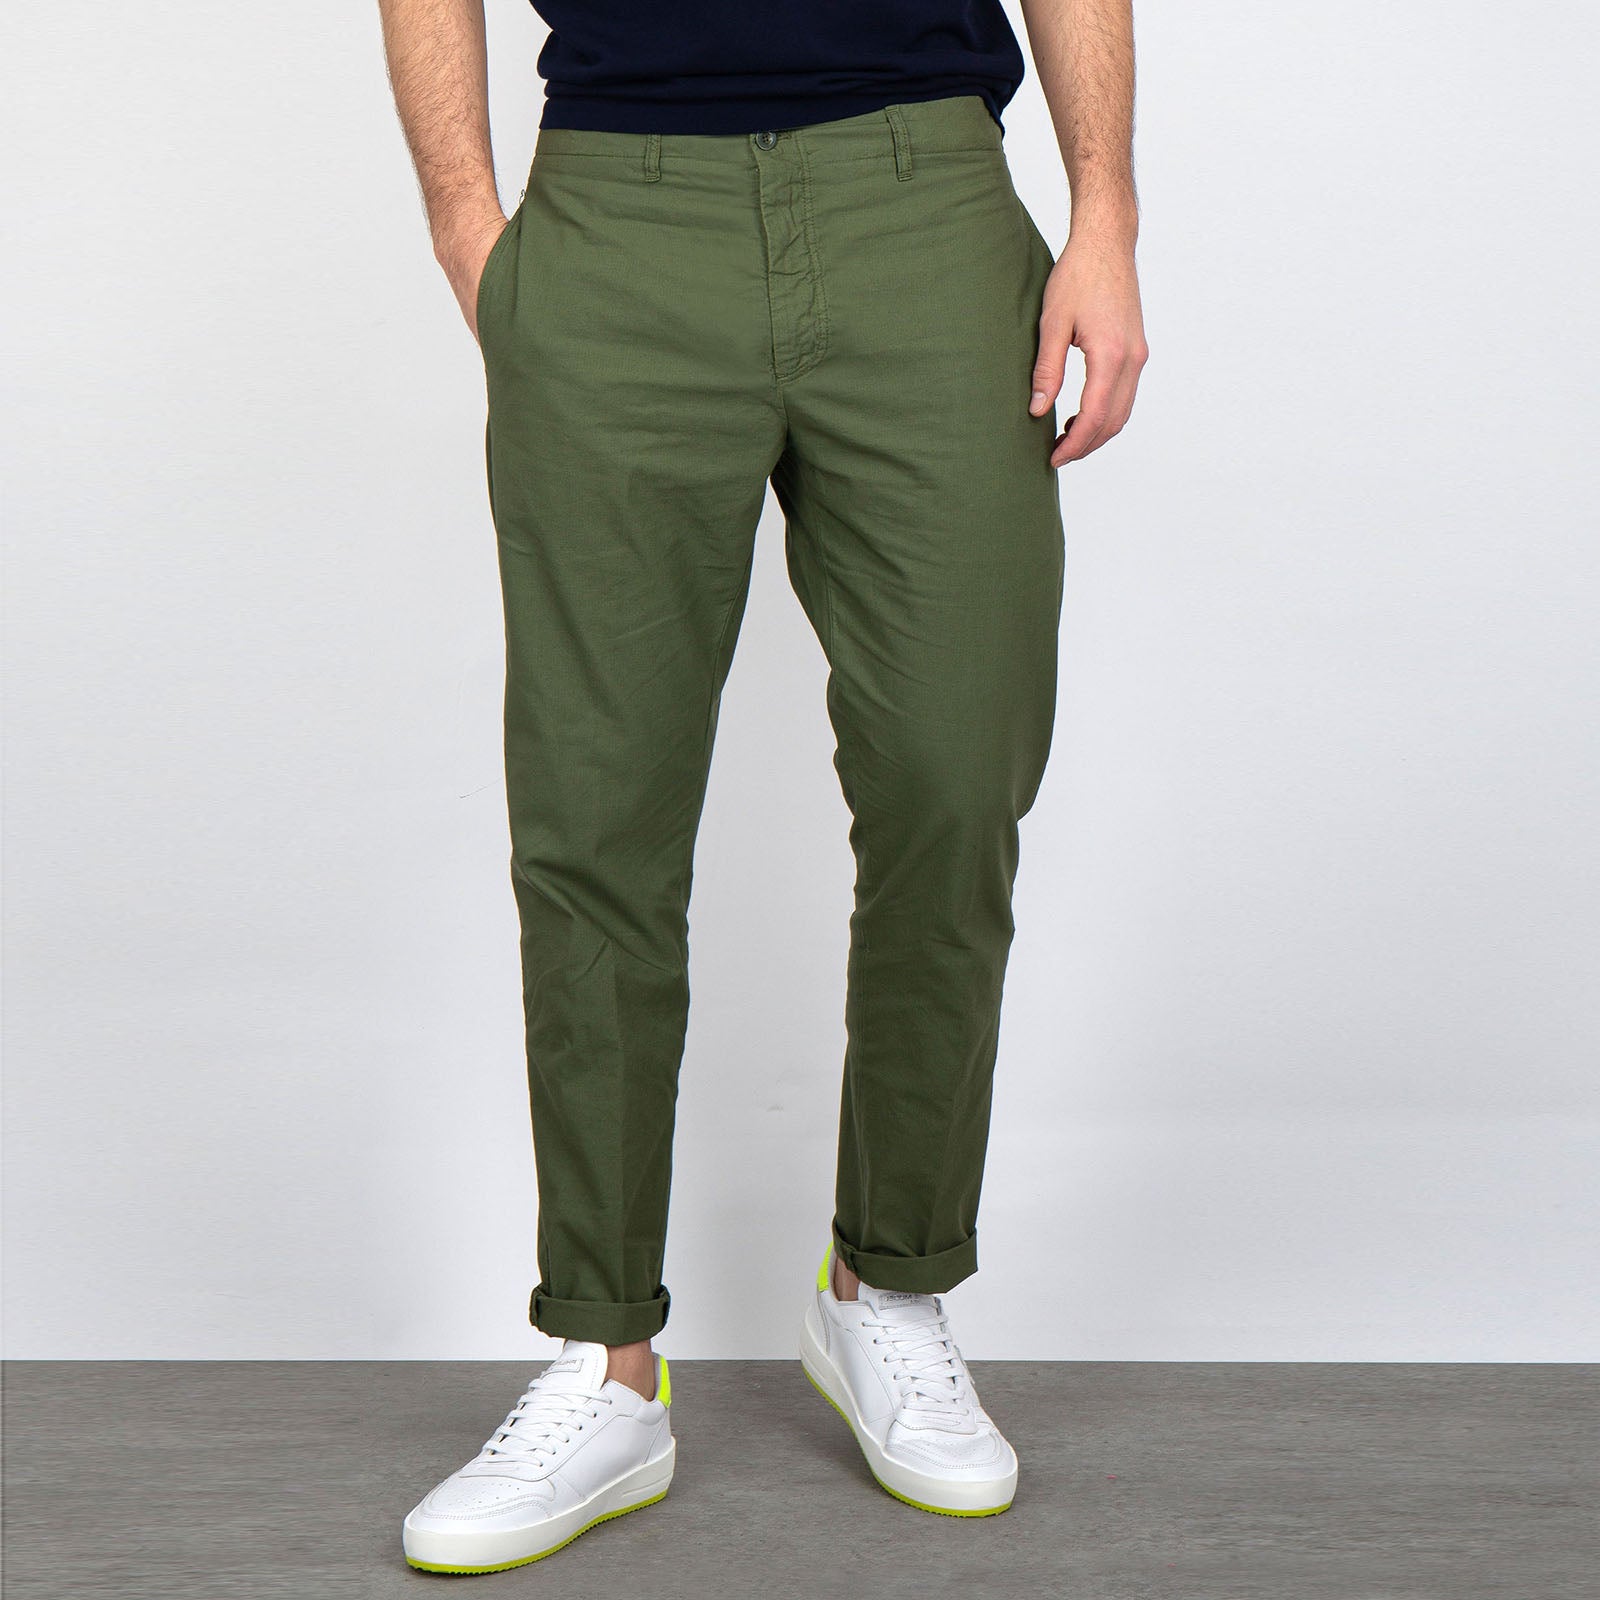 Department Five Green Military Cotton Trousers - 7